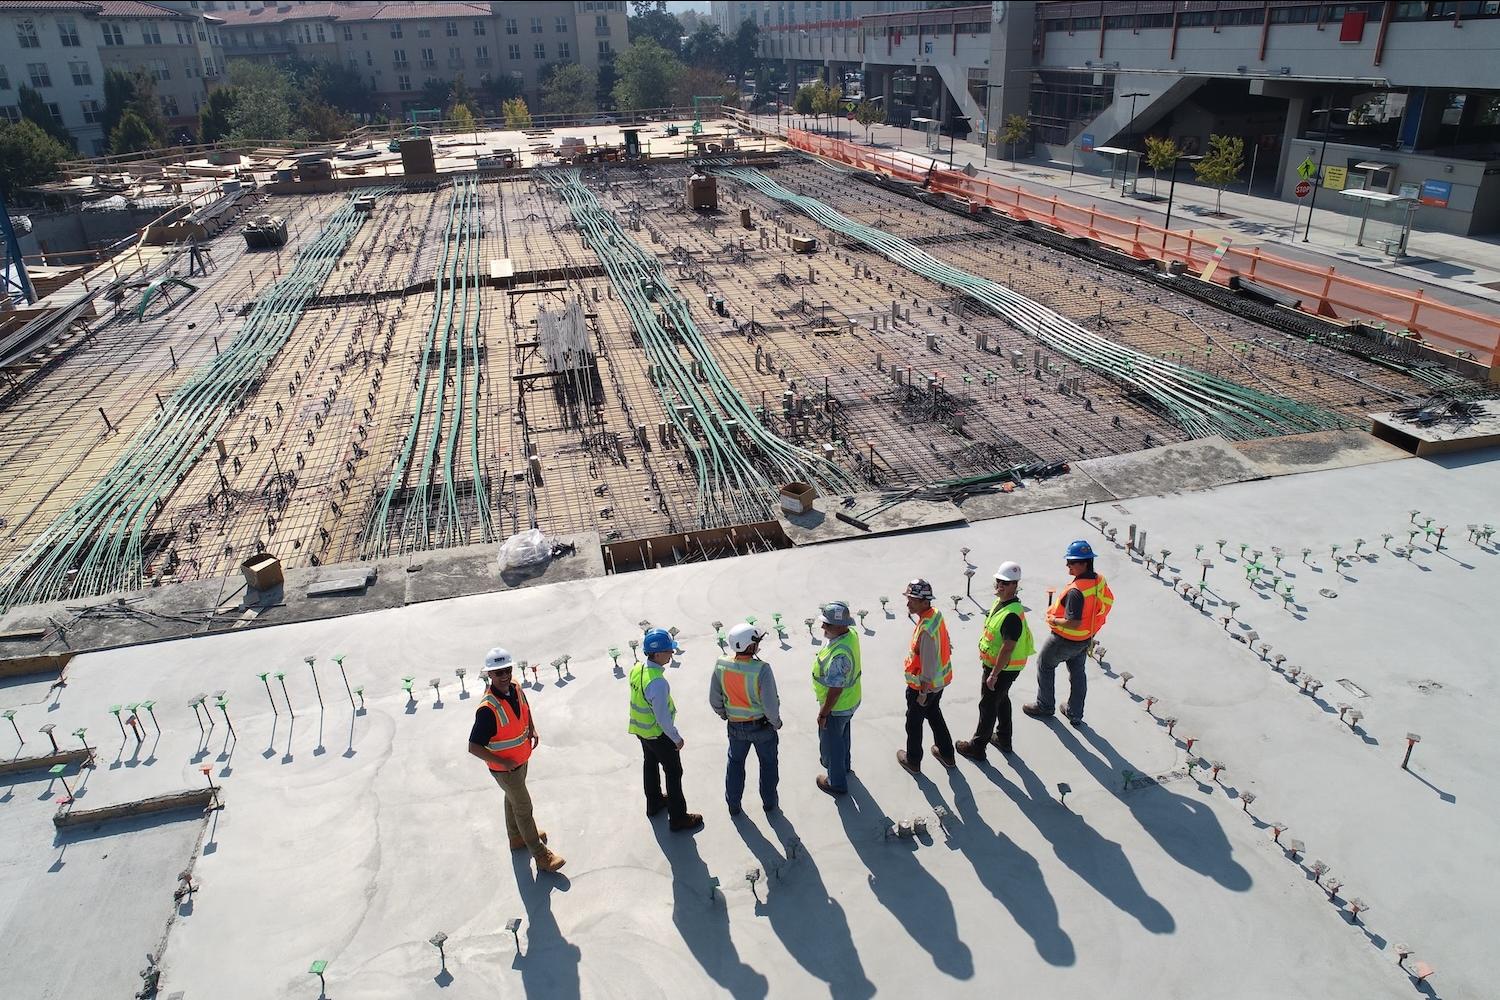 Workers on the construction site of a large building - how the construction sector can be part of the circular economy